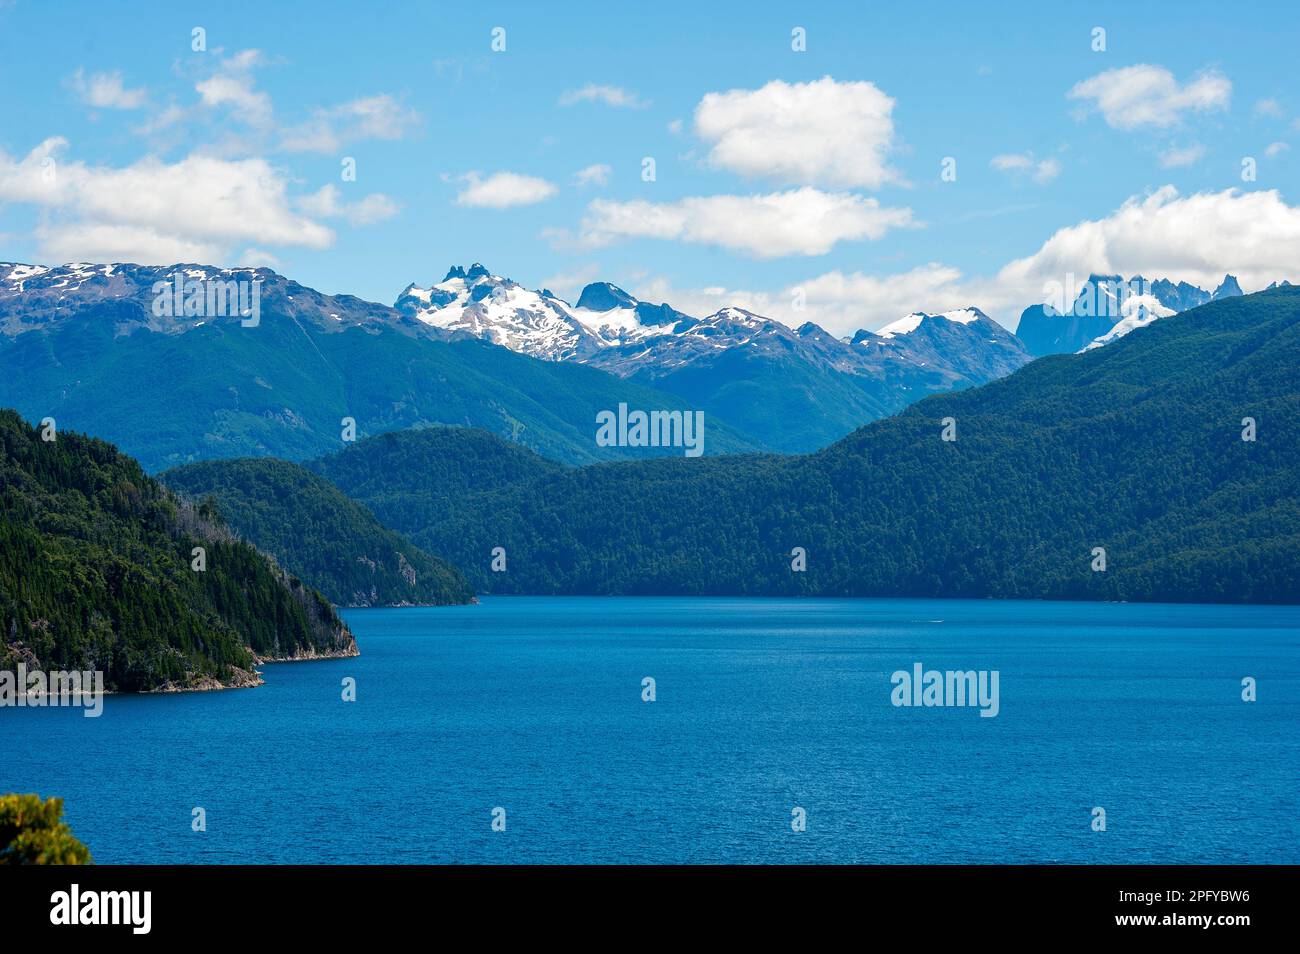 Futalaufquen Lake and snowy peaks seen from Ruta 71 at Los Alerces National Park, Chubut Province, Argentina Stock Photo